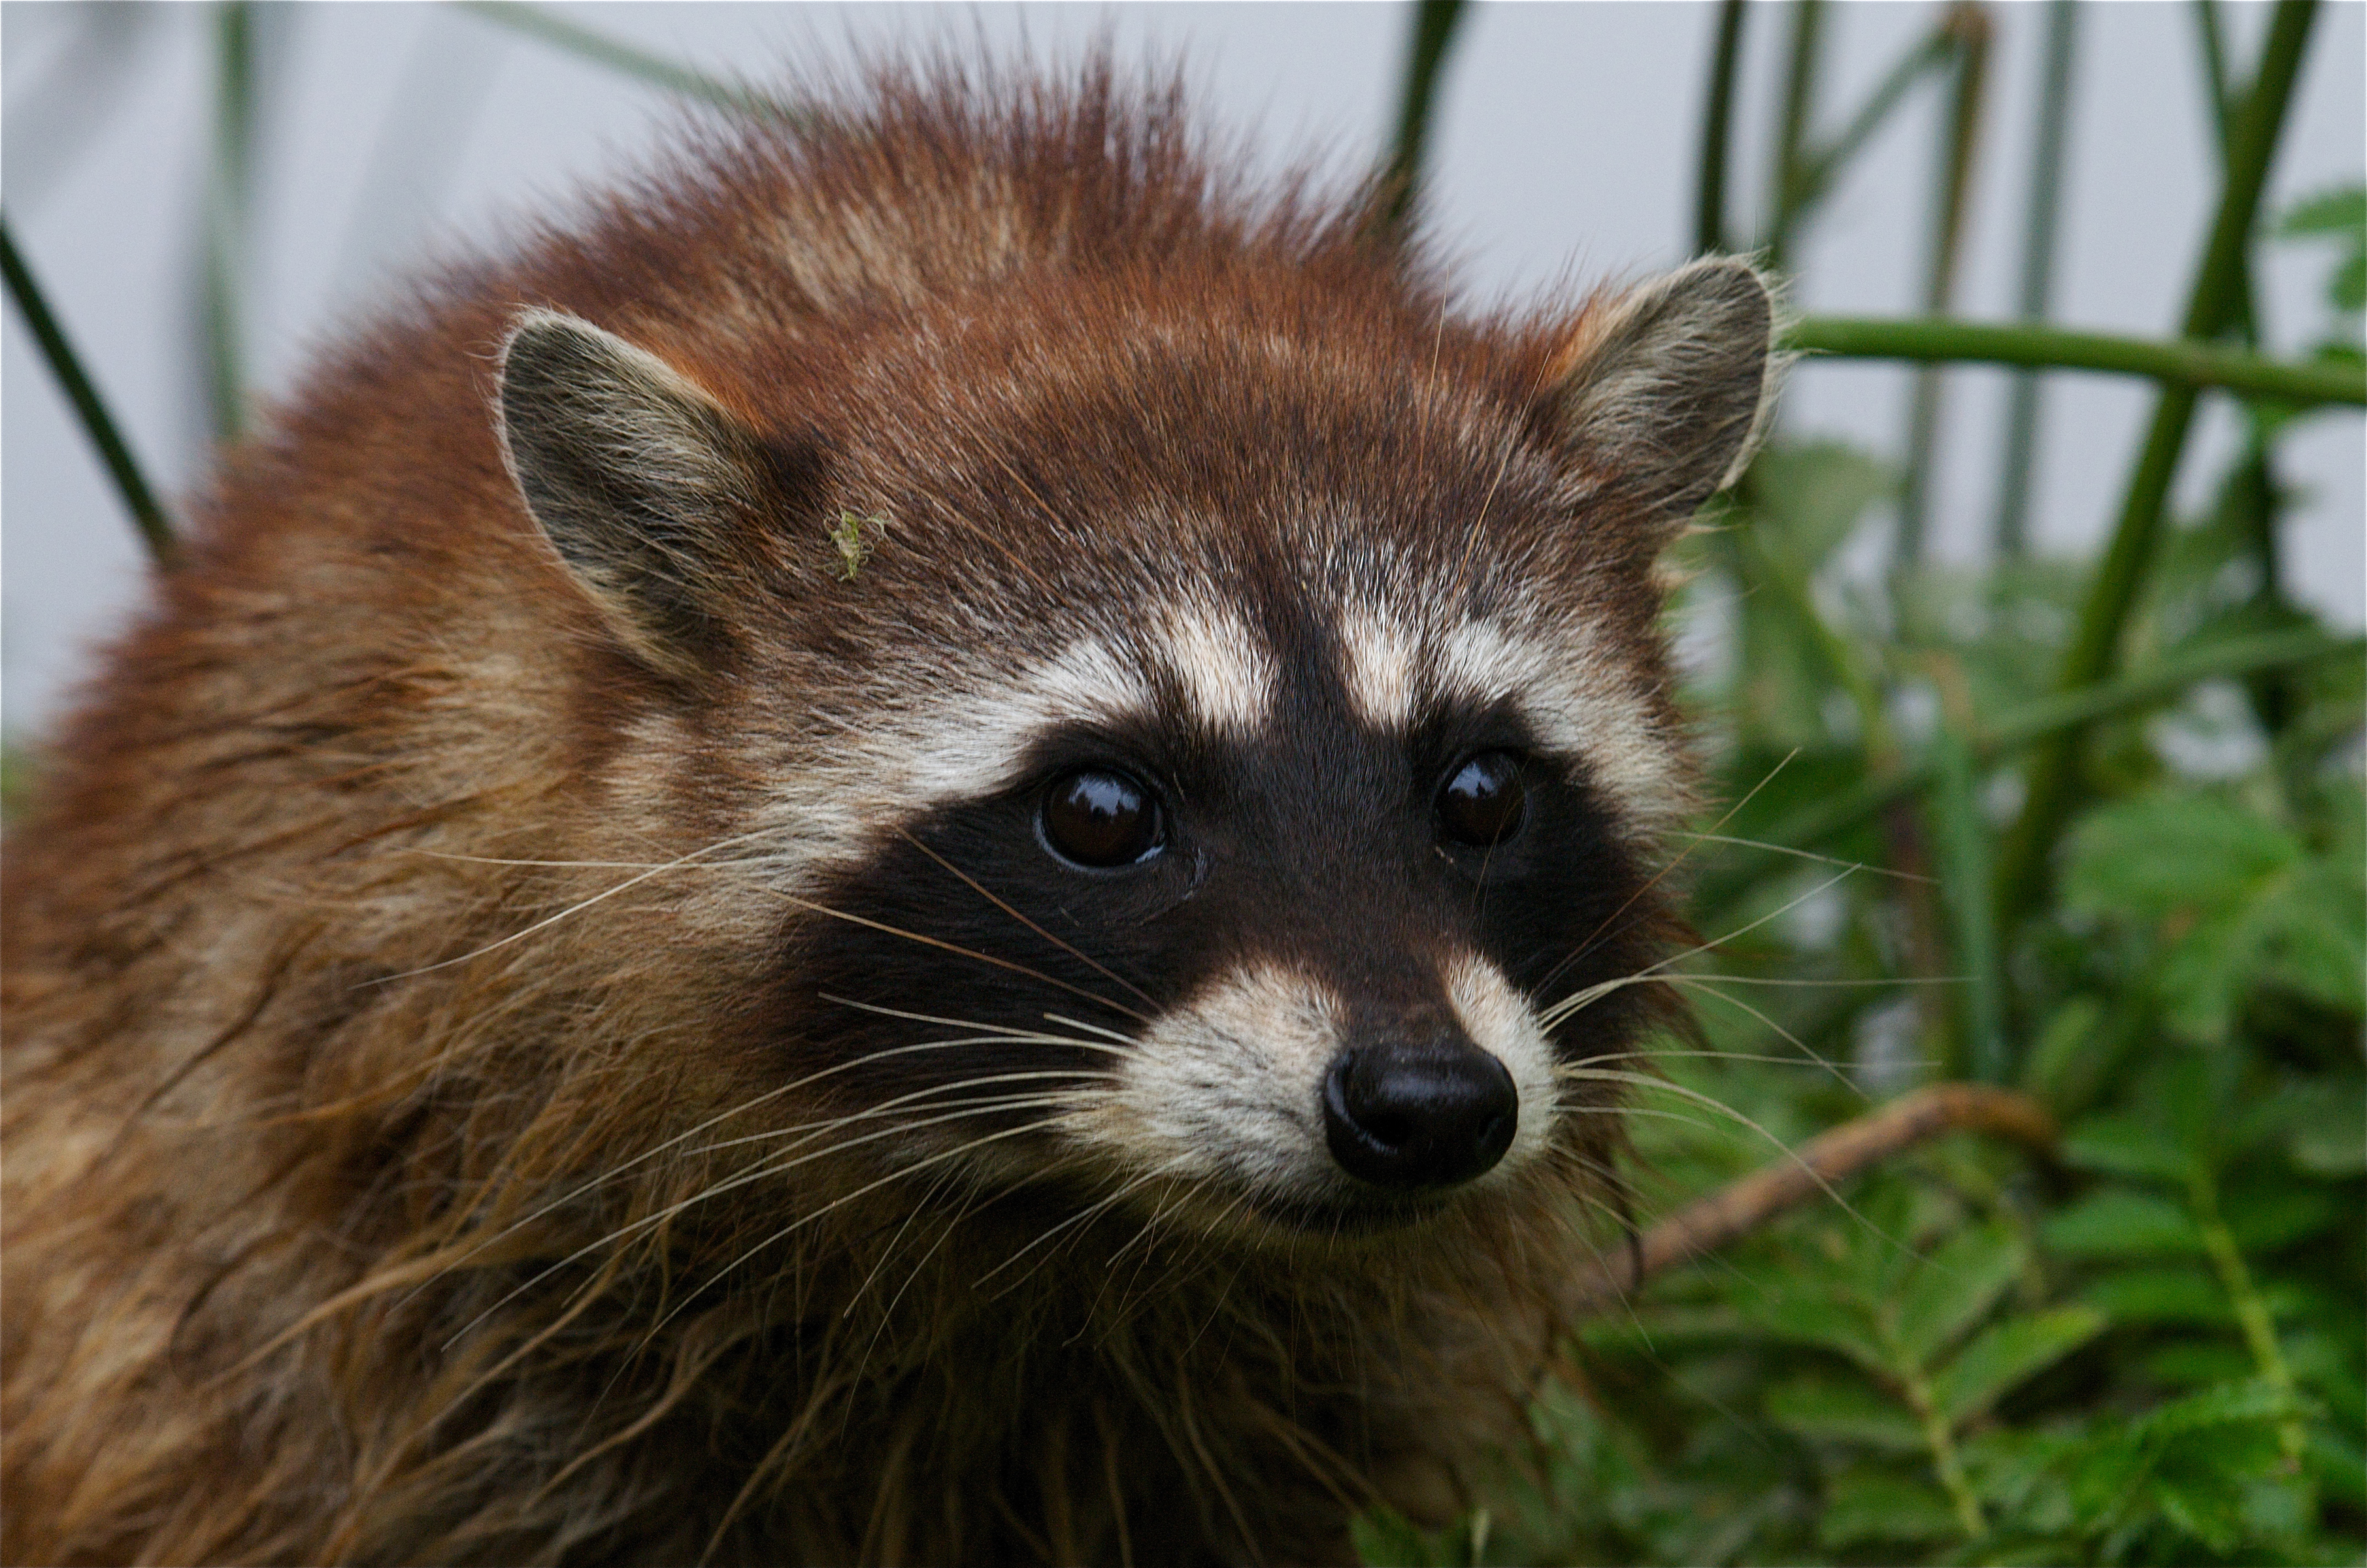 Furry critter with pointy nose, round erect ears and a prominent, black bandit’s mask looks at the camera. Ringtail Raccoon.